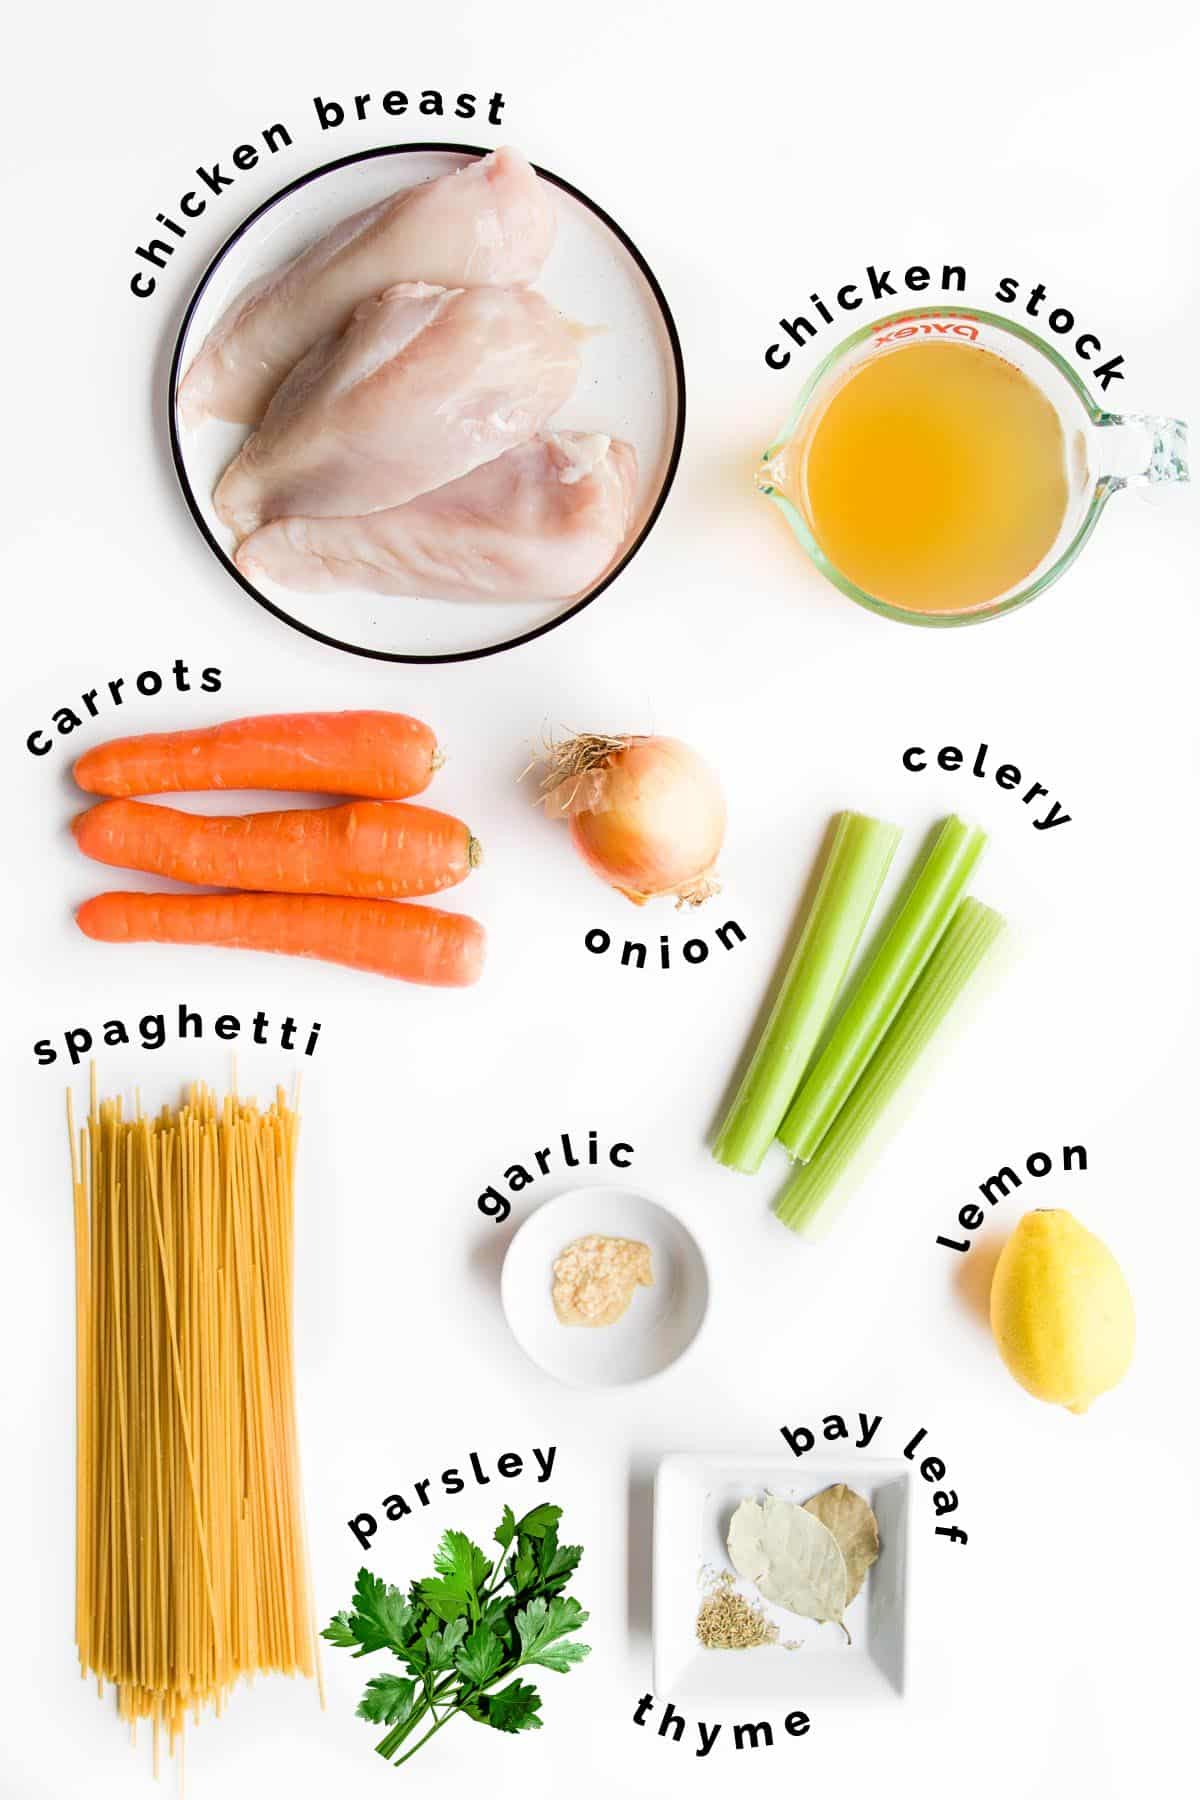 Ingredients Needed to Make Slow Cooker Chicken Noodle Soup (Labelled)